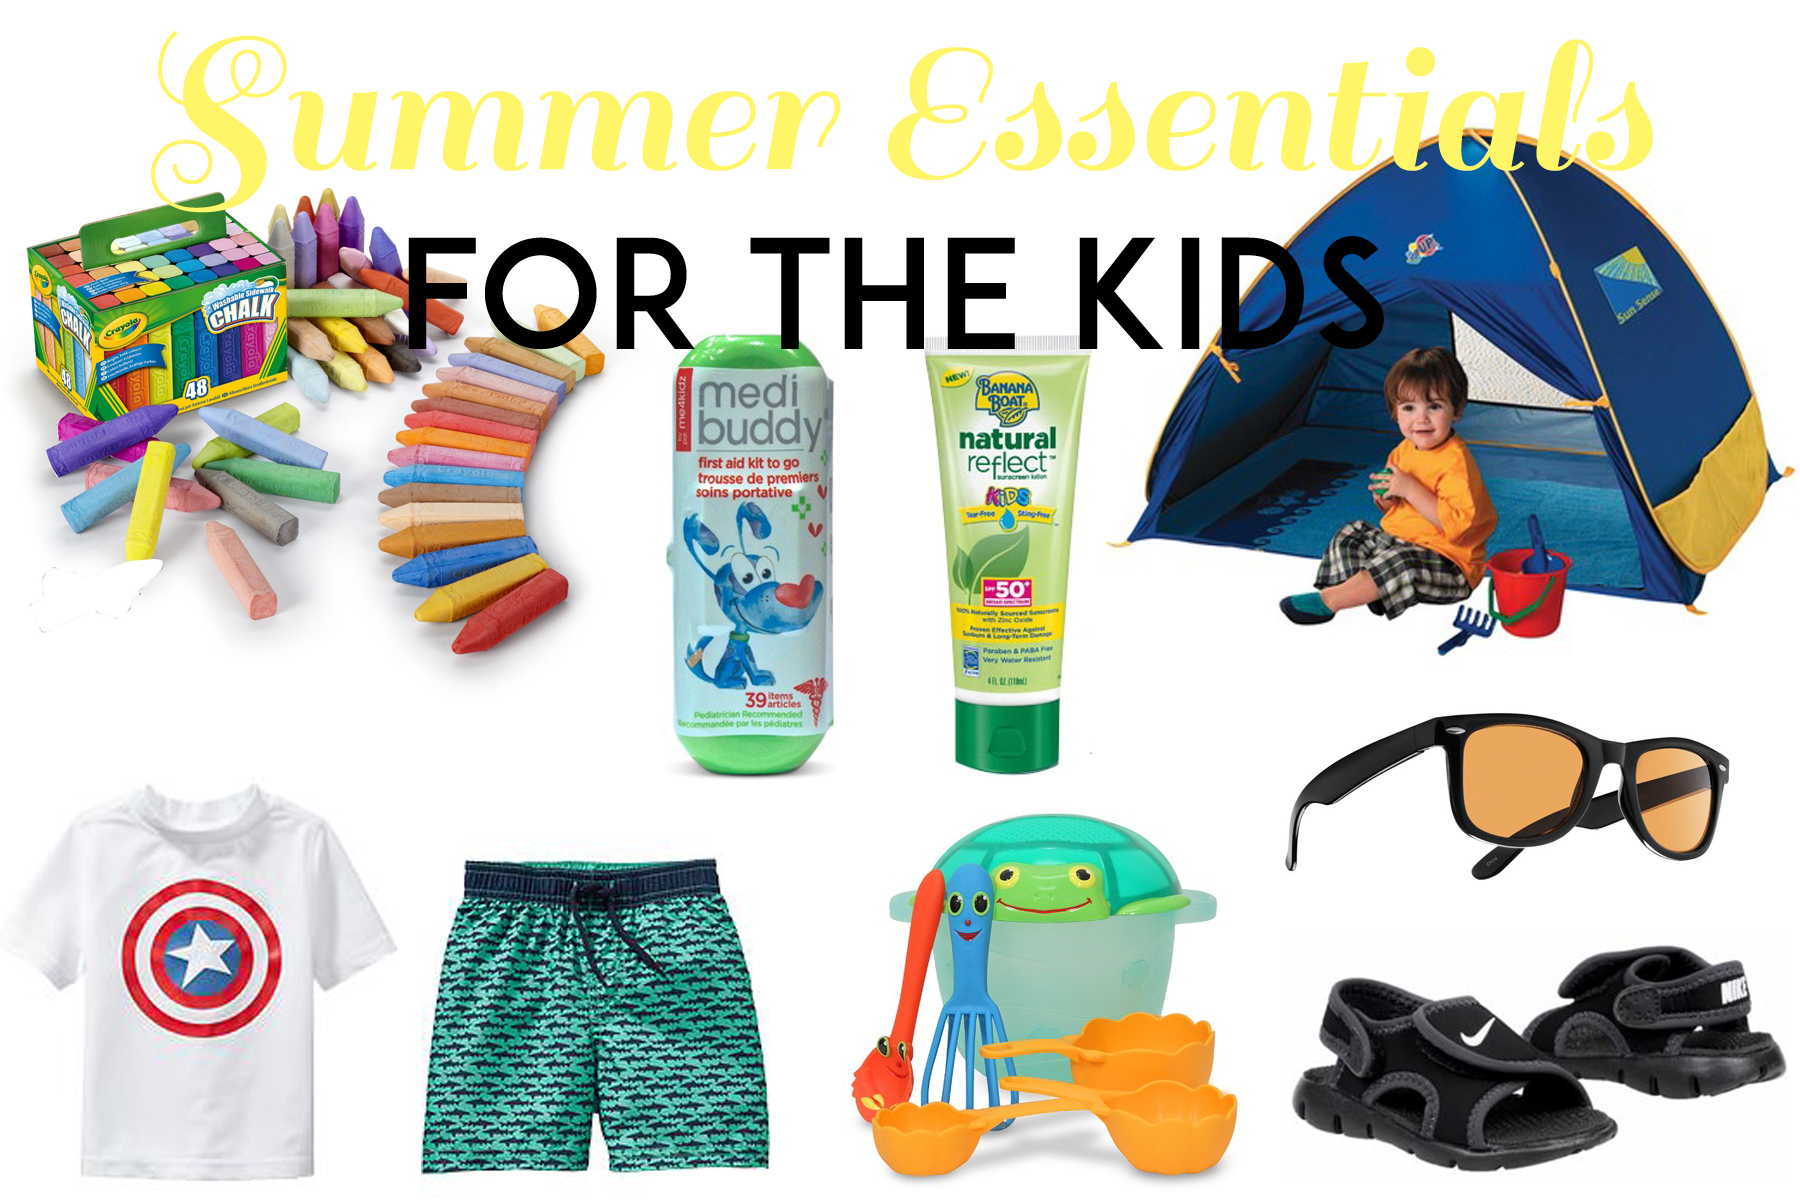 Summer essentials for the kids!